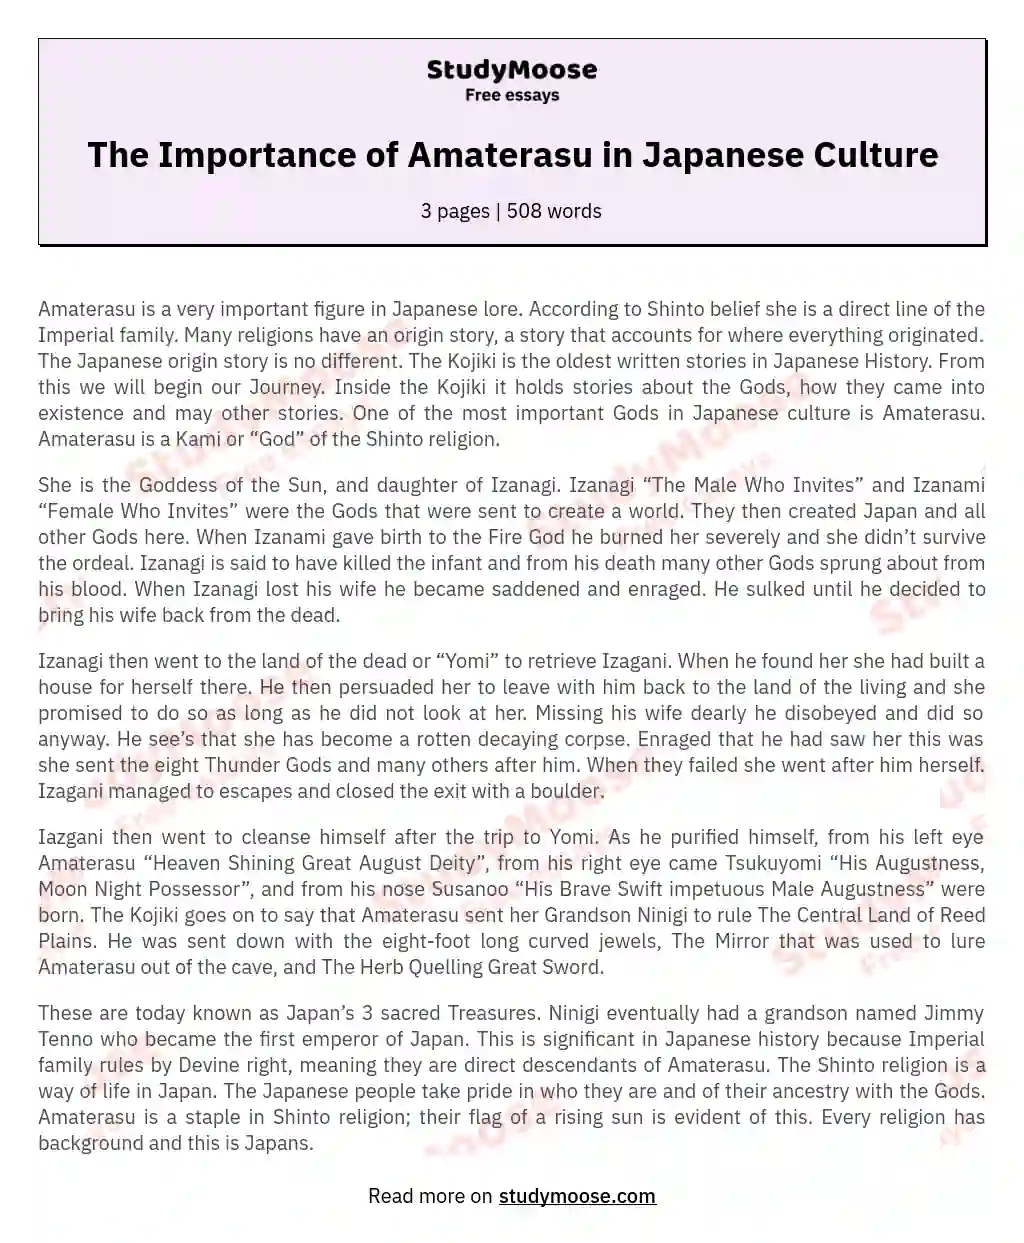 The Importance of Amaterasu in Japanese Culture essay